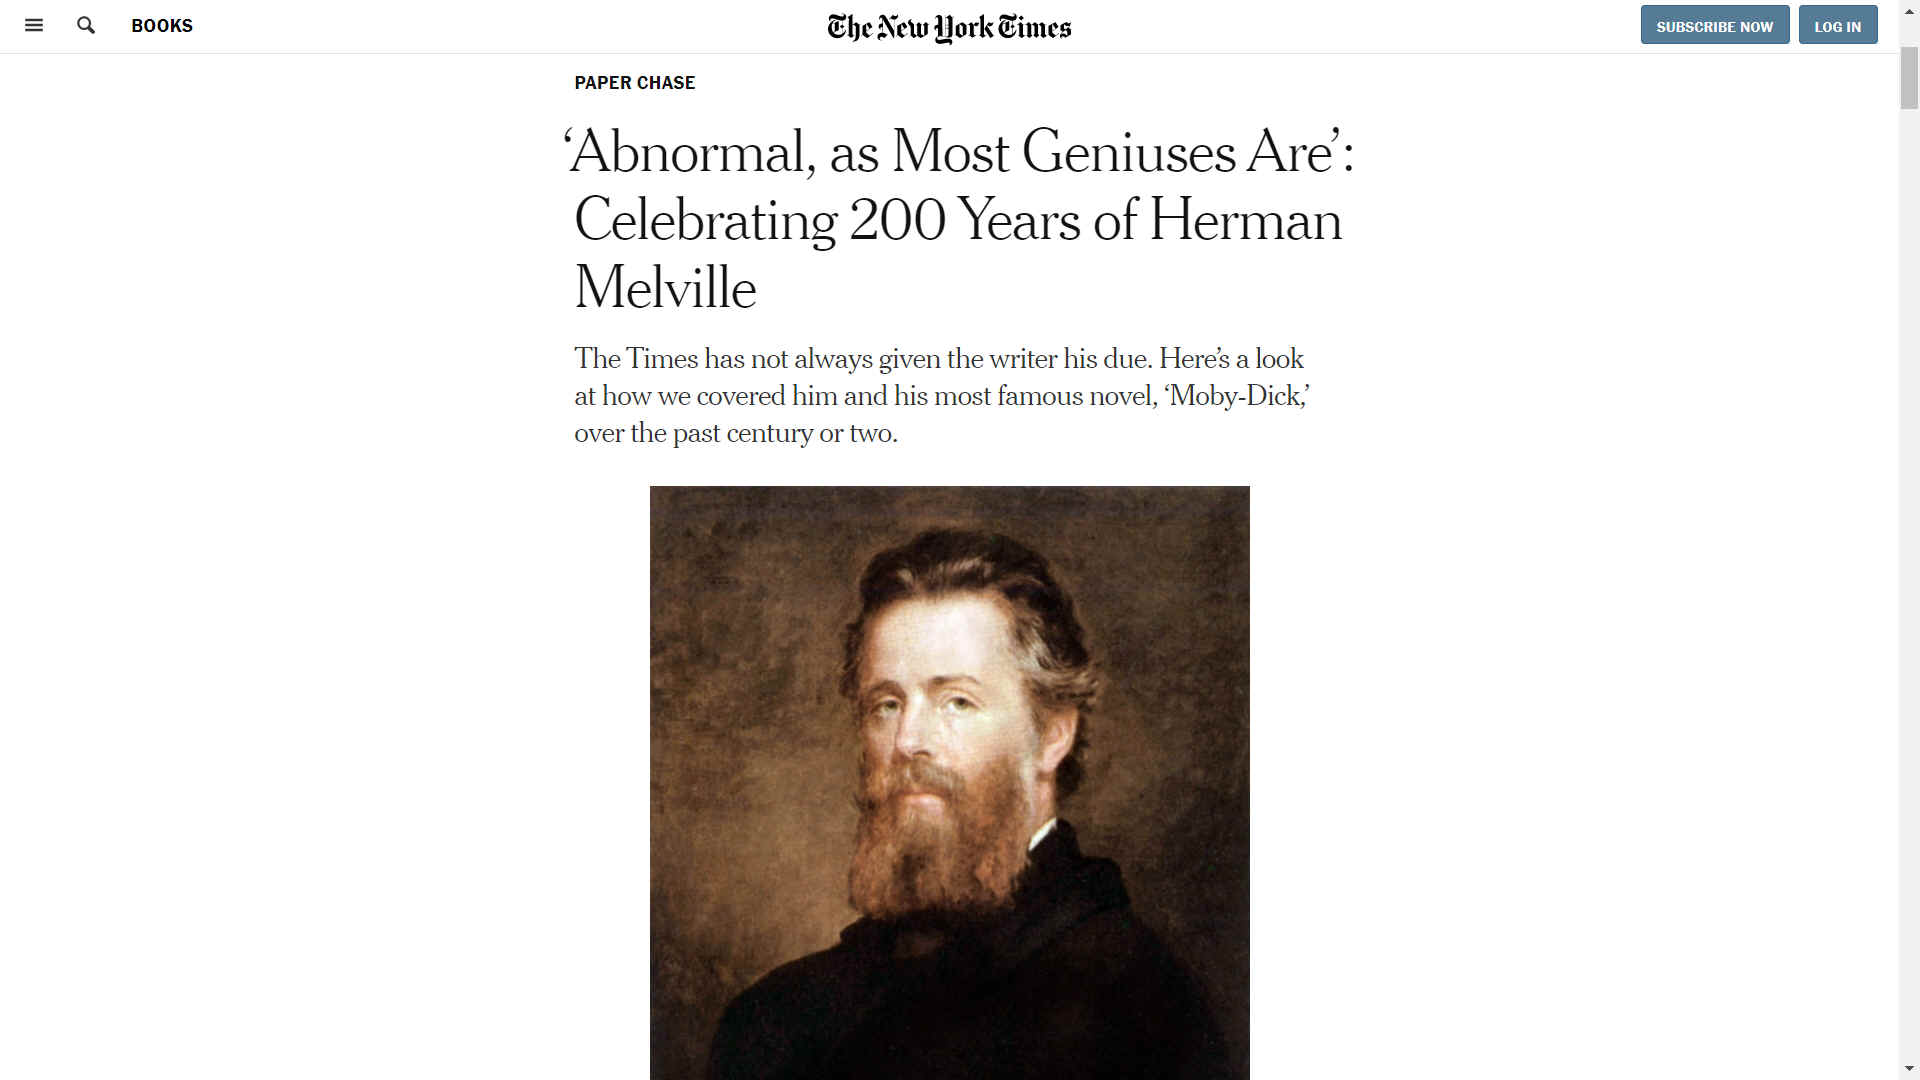 New York Times reviews celebrating 200 years of Herman Melville